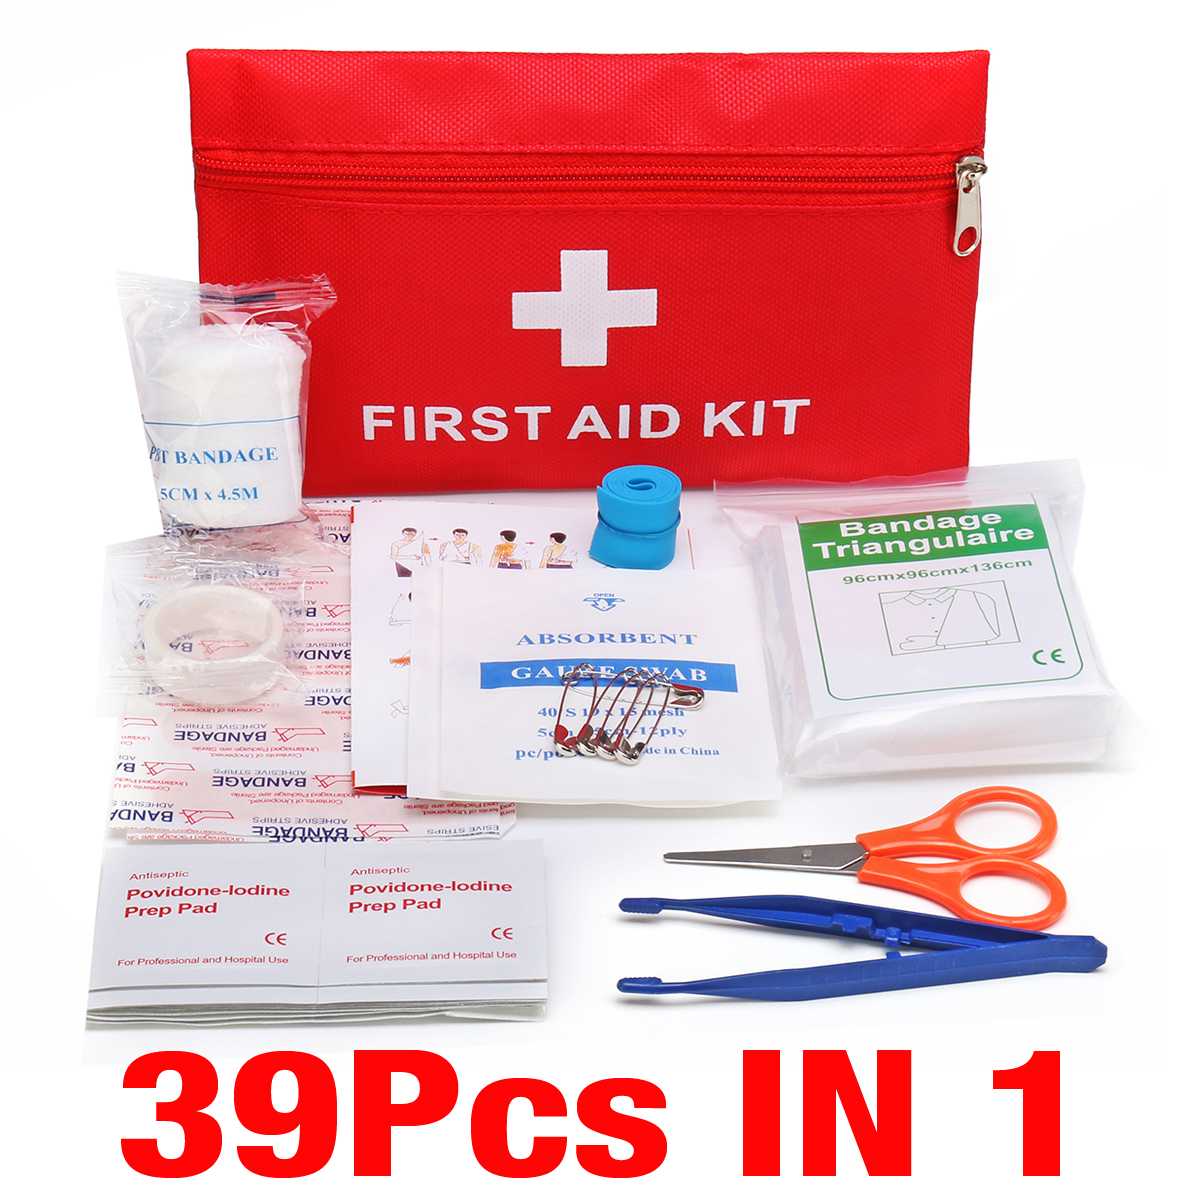 16Pcs-300Pcs Portable First Aid Kit Survival Bag Mini Emergency Bag for Car Home Picnic Camping Travelling Outdoor